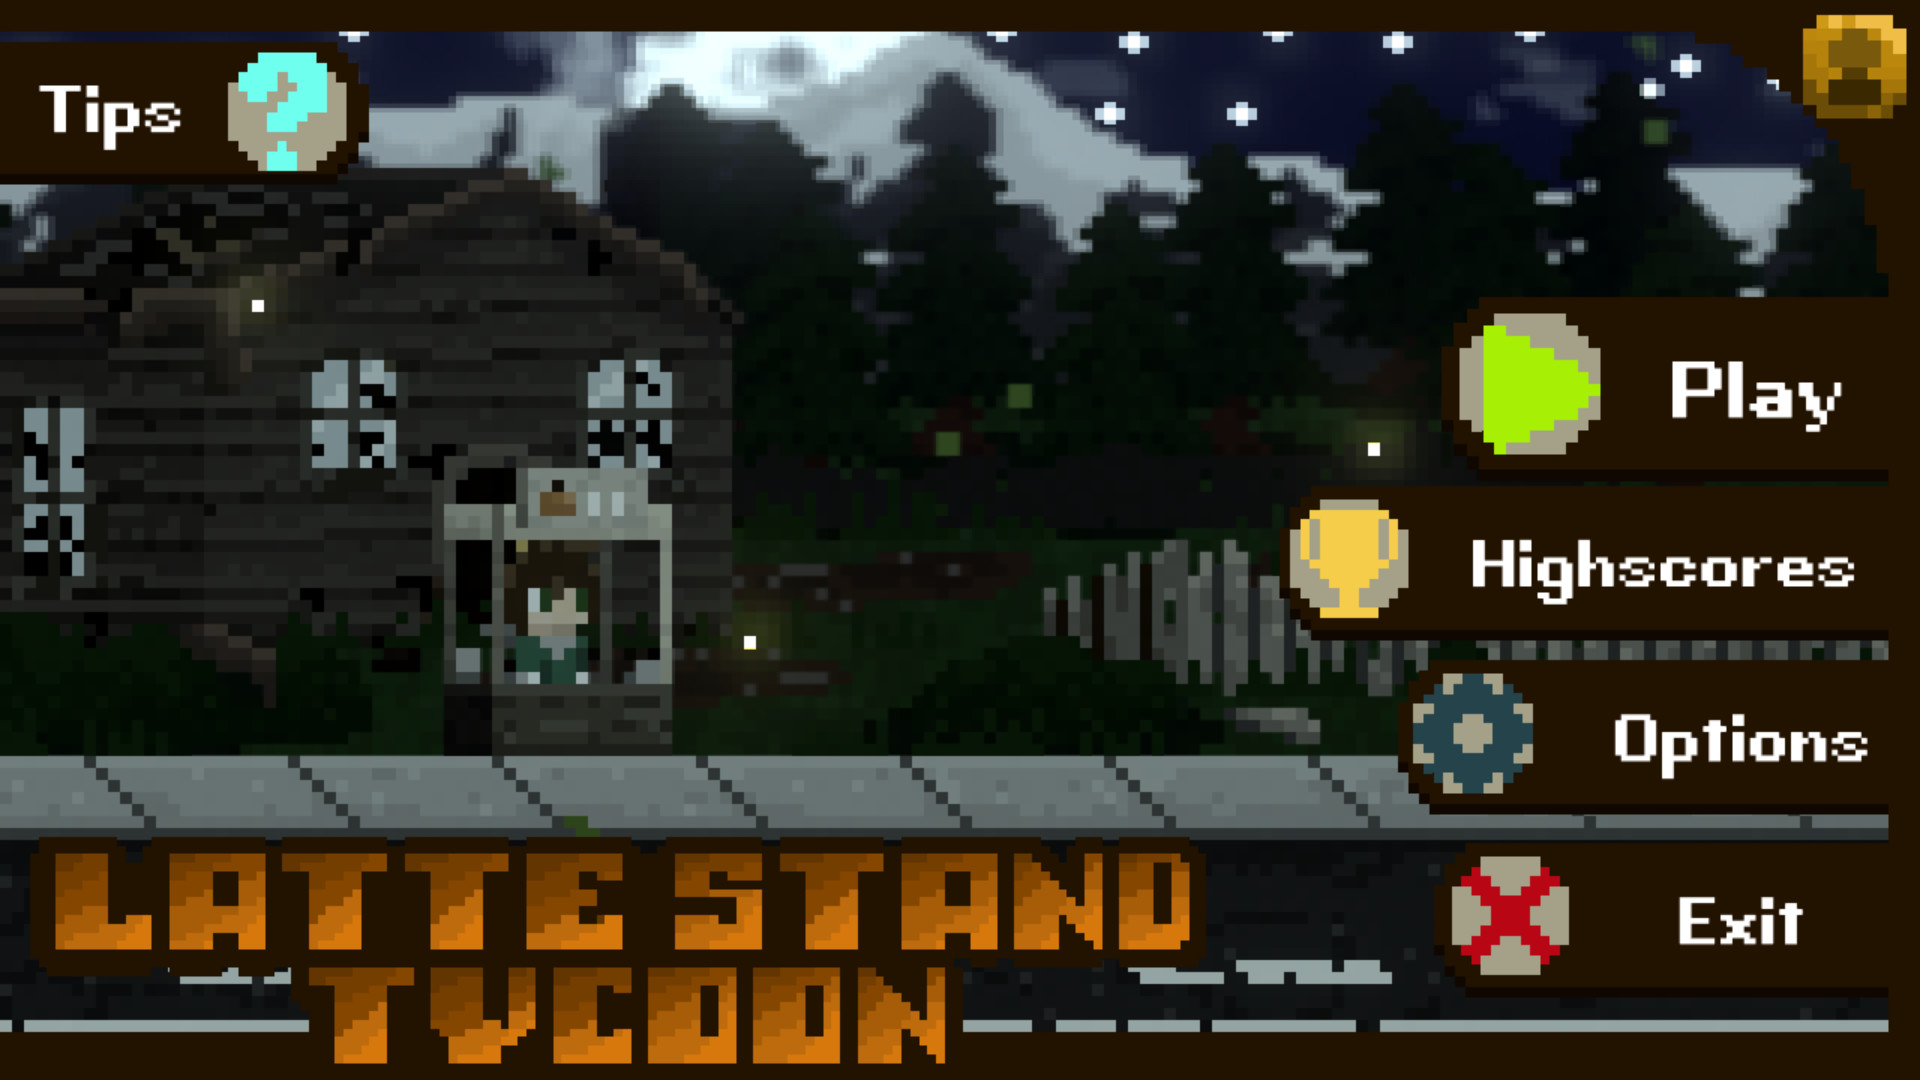 Latte Stand Tycoon Steam CD Key, $0.7